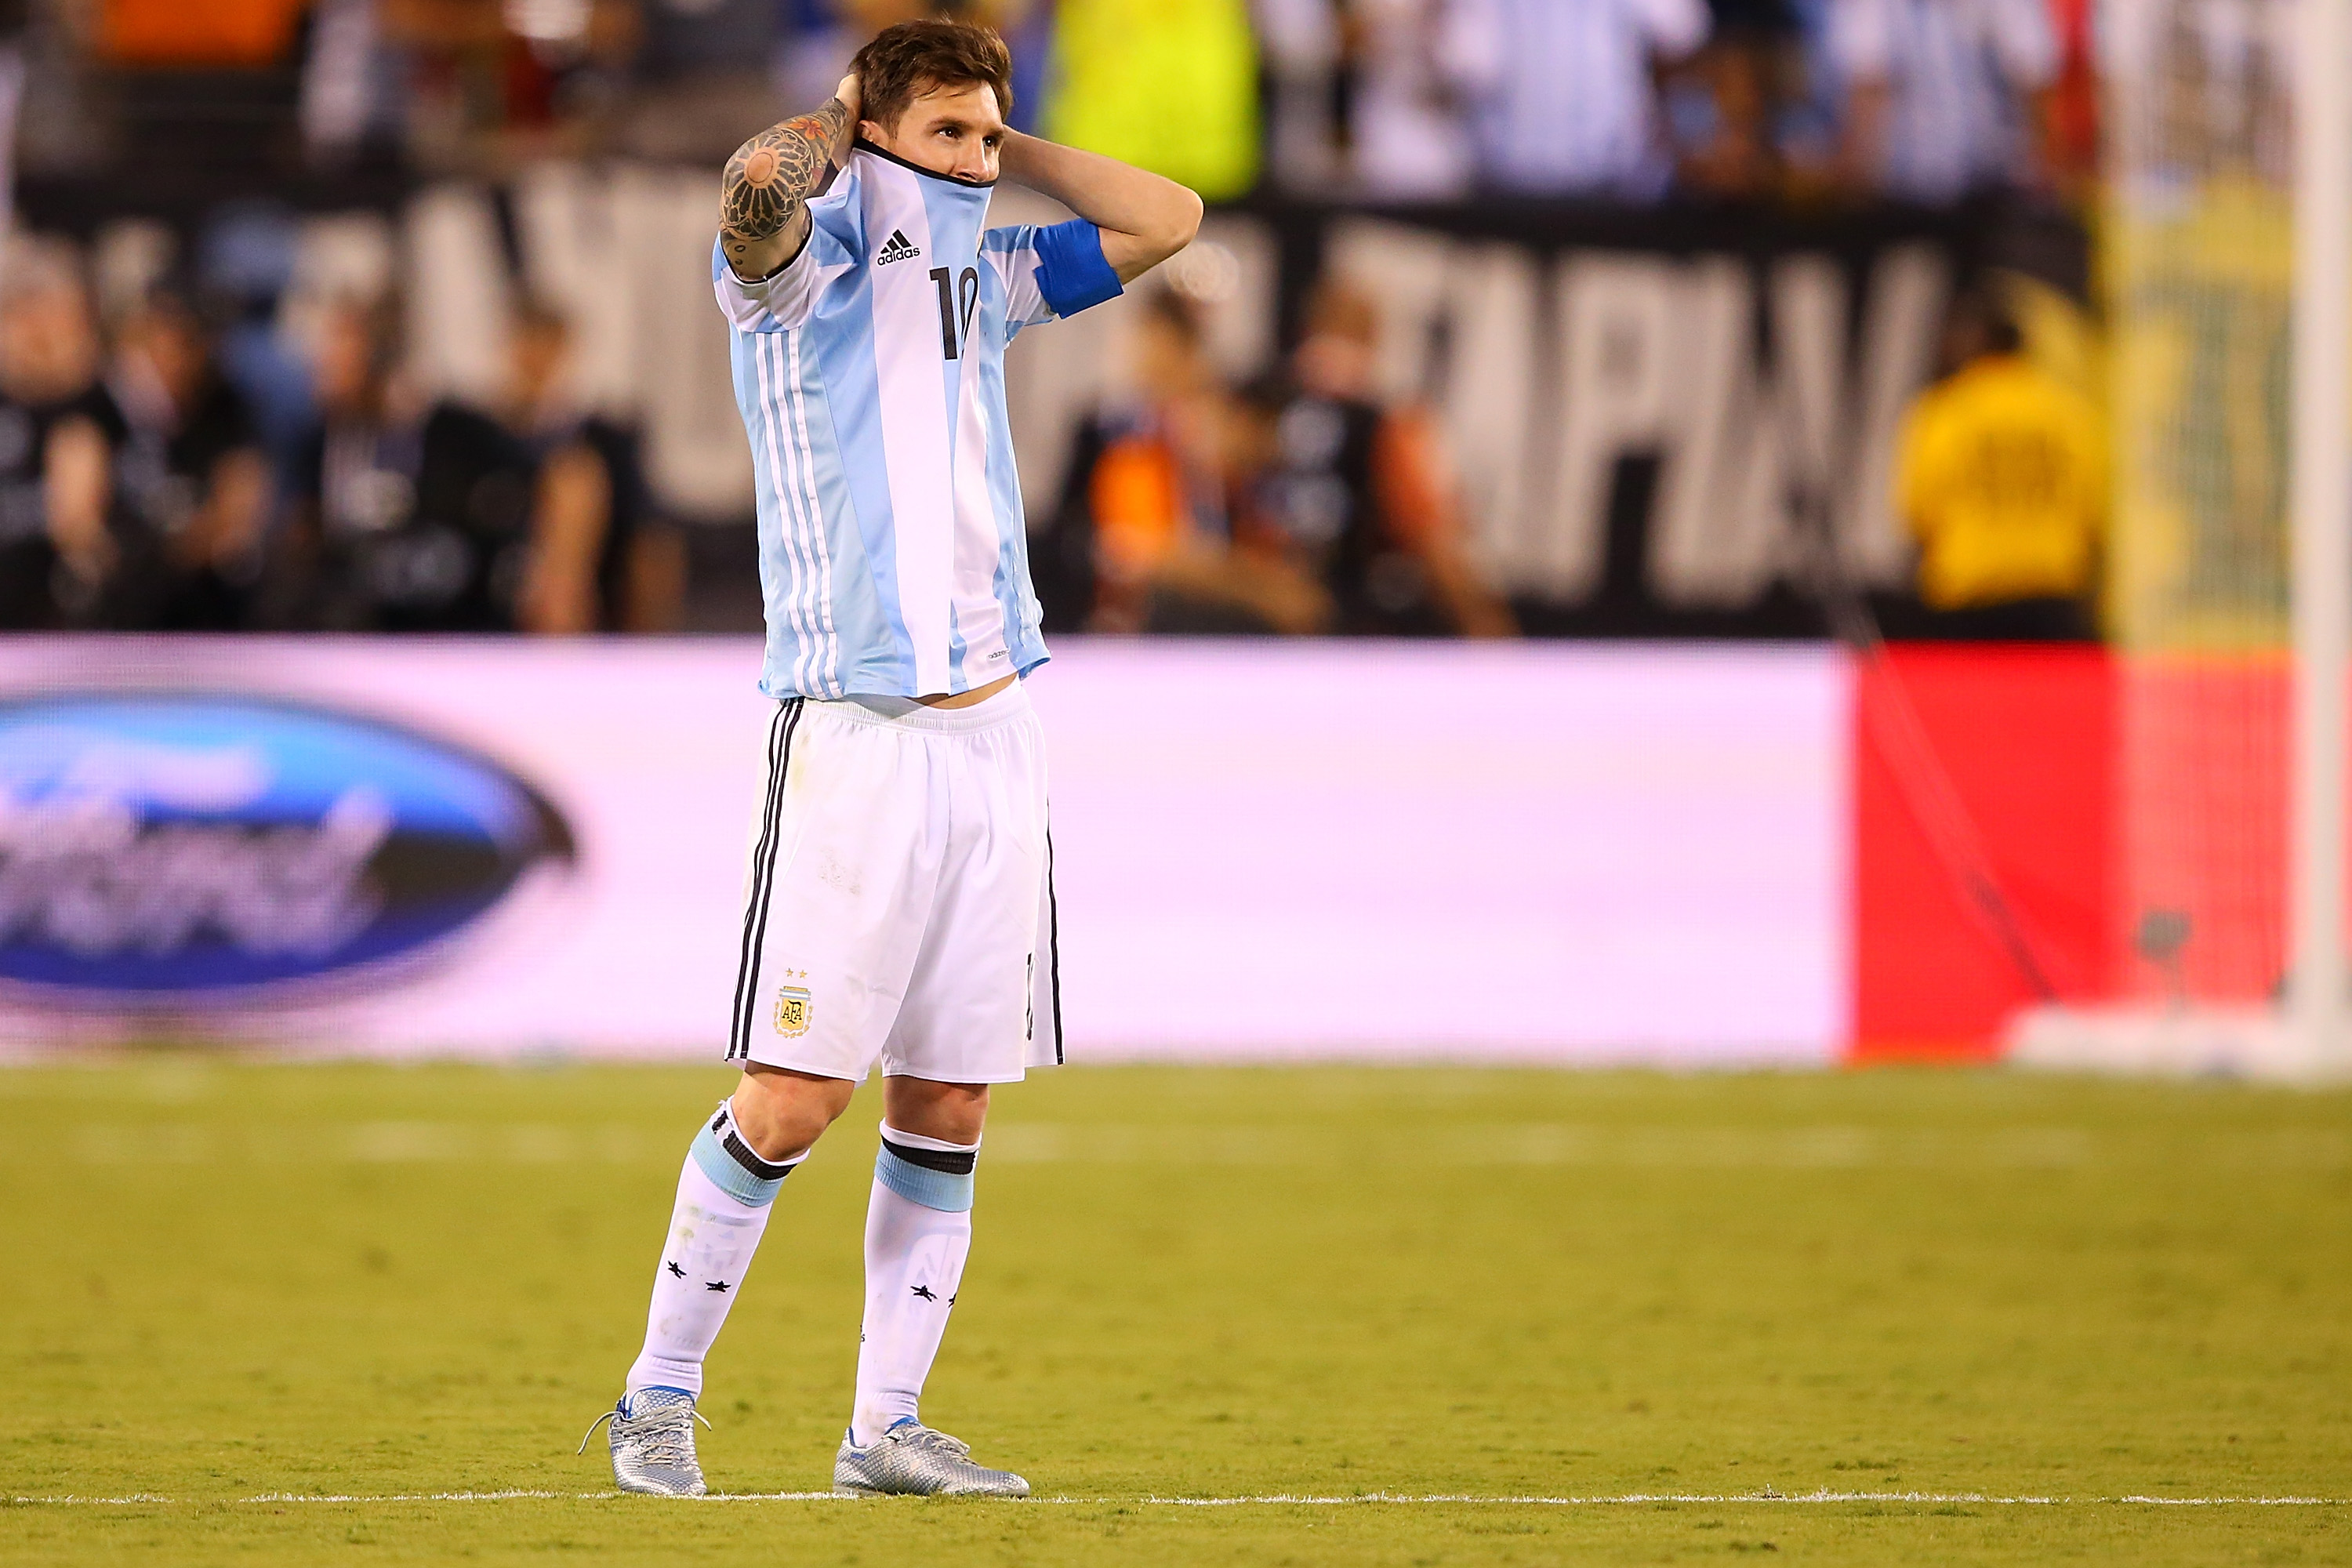 World reacts on Twitter as Messi announces retirement from international football